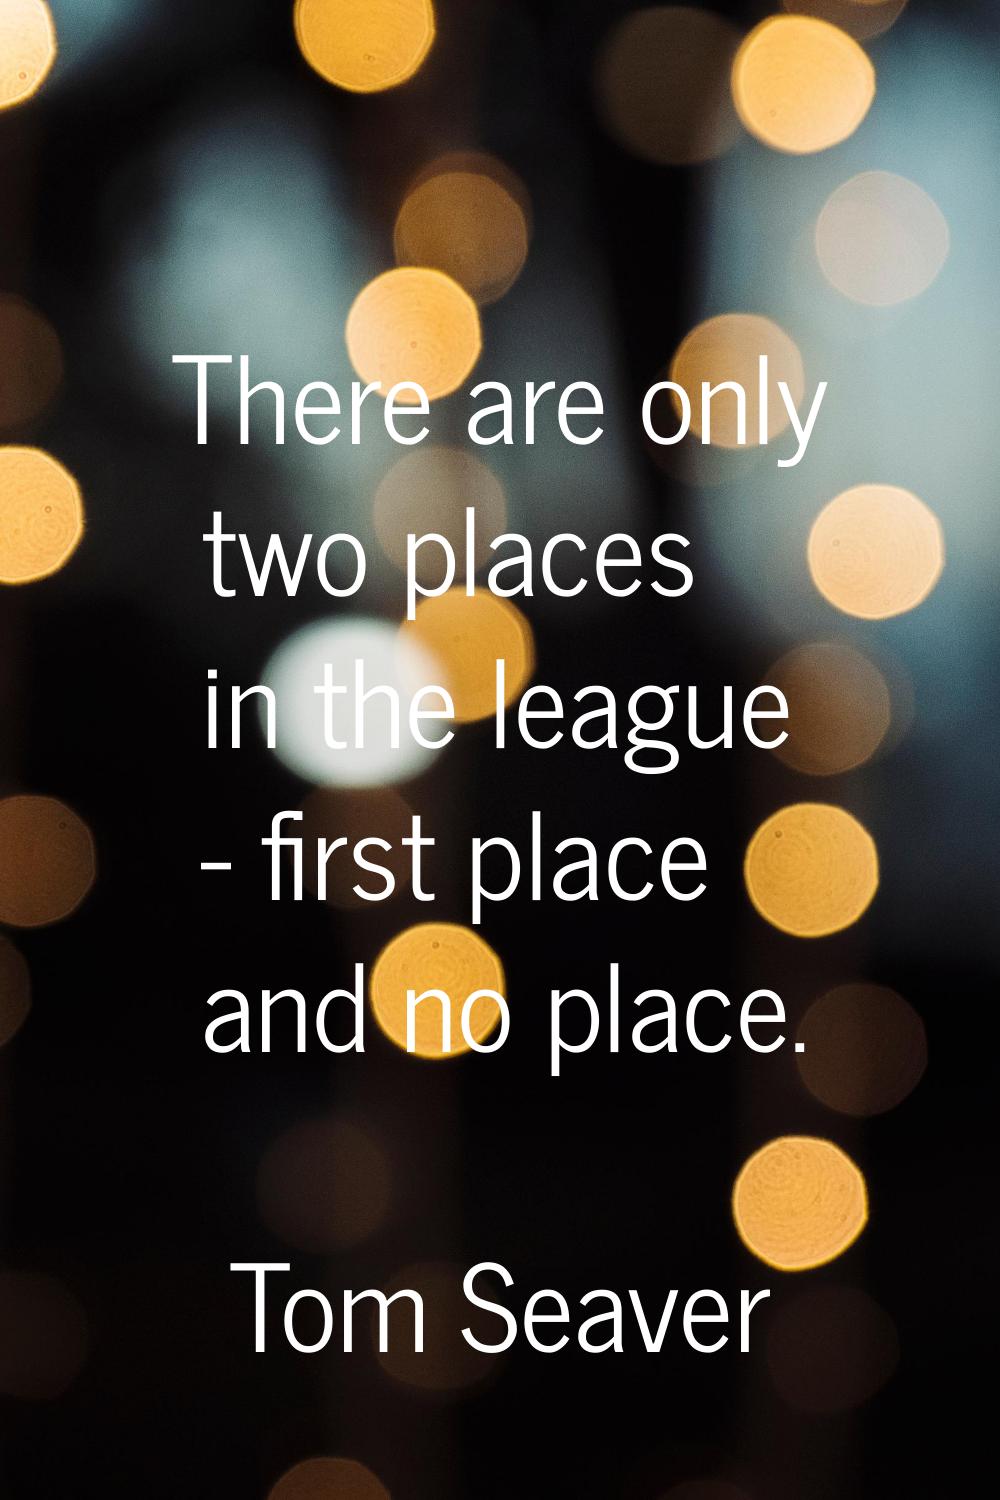 There are only two places in the league - first place and no place.